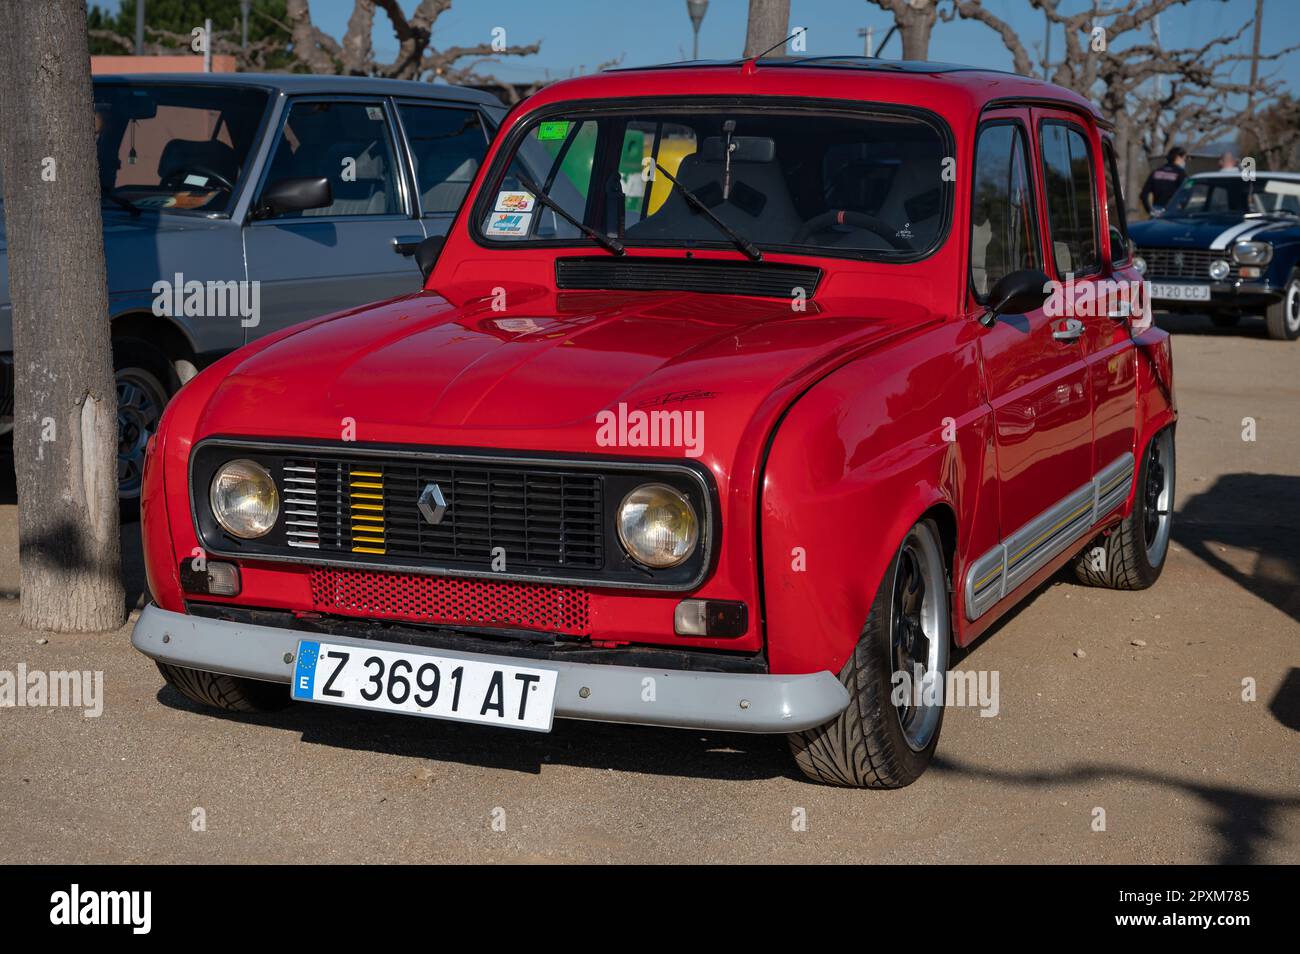 RENAULT 4 (4L) - 1972, World Series by Renault 2014